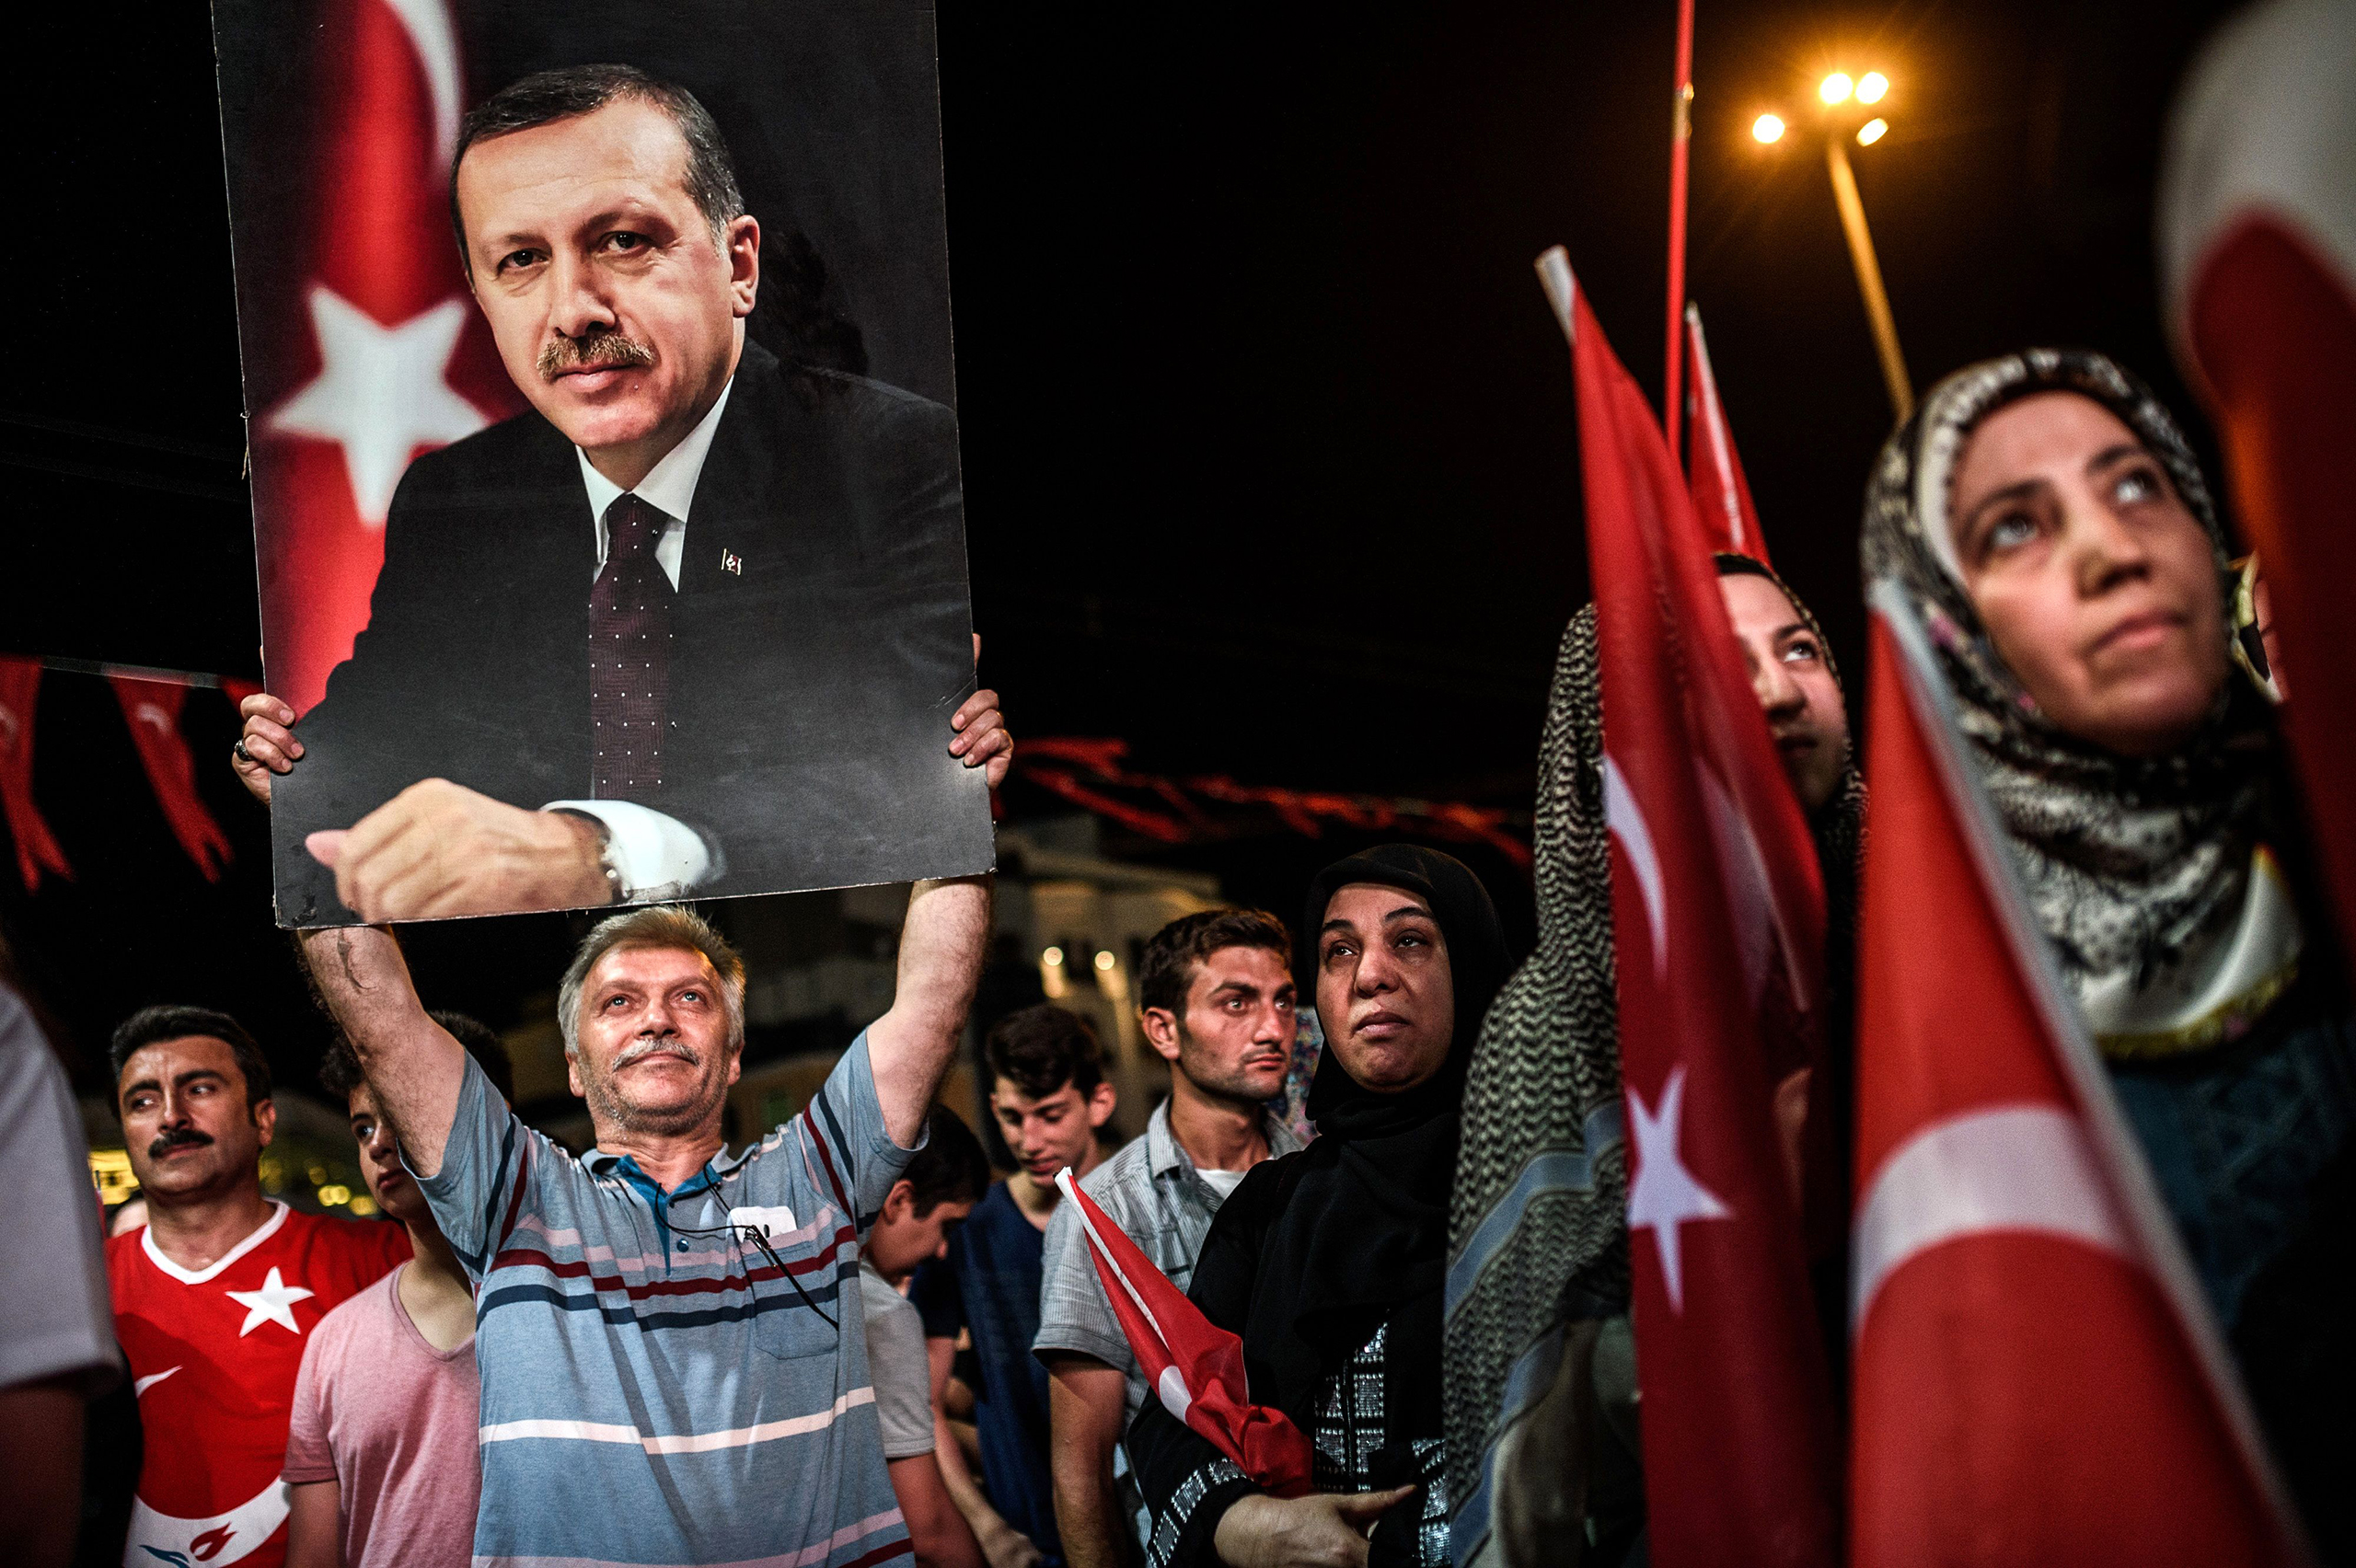 A man holds up a photo of Turkey's President Recep Tayyip Erdogan during a pro-Erdogan rally in Taksim Square in Istanbul on July 22, 2016. (Ozan Kose—AFP/Getty Images)